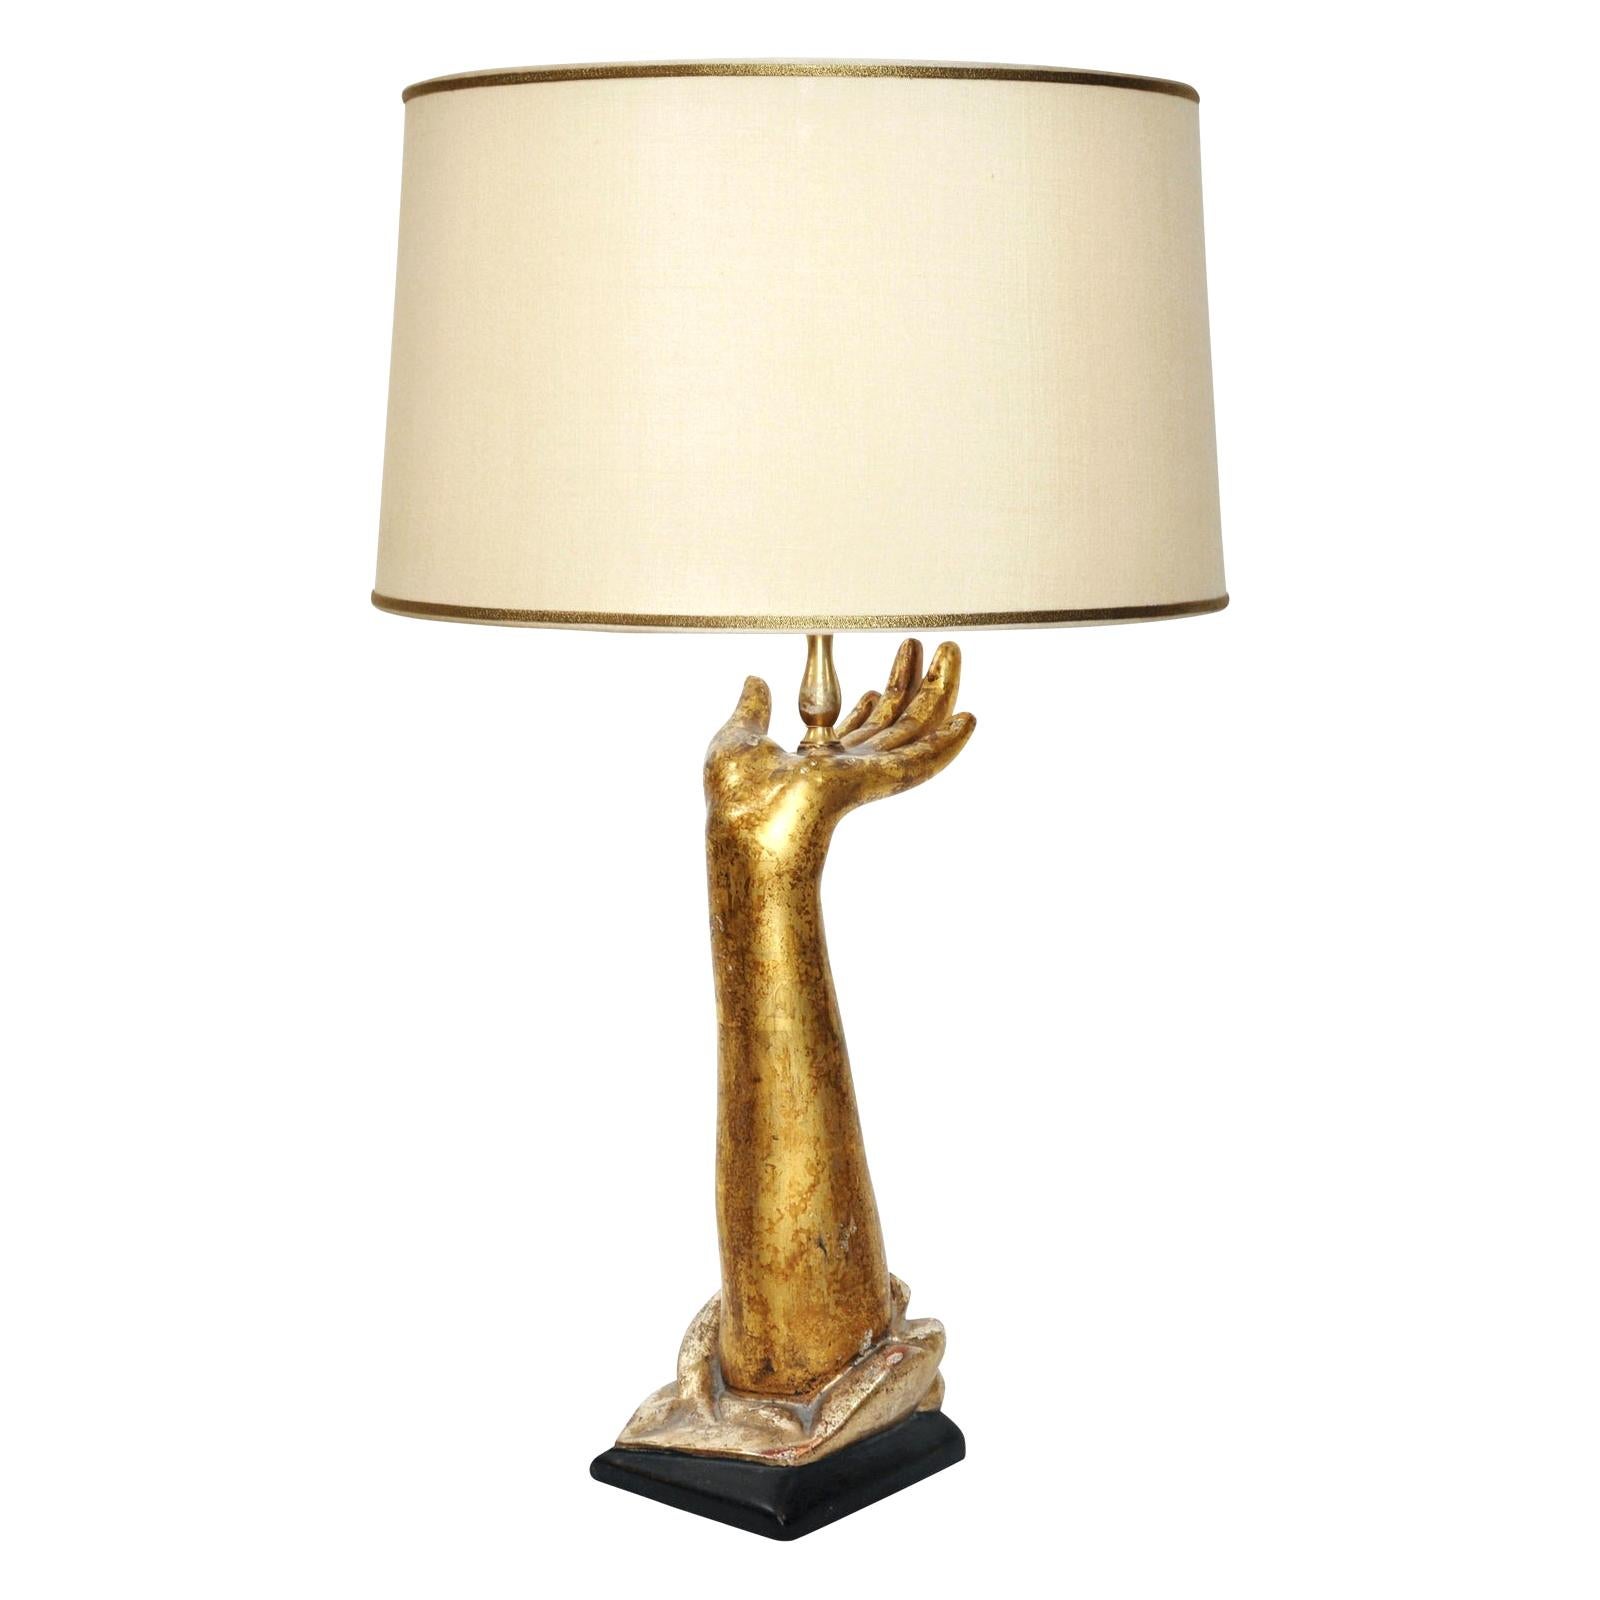 Exquisite Designer Giltwood Hand Form Table Lamp by Randy Esada Designs